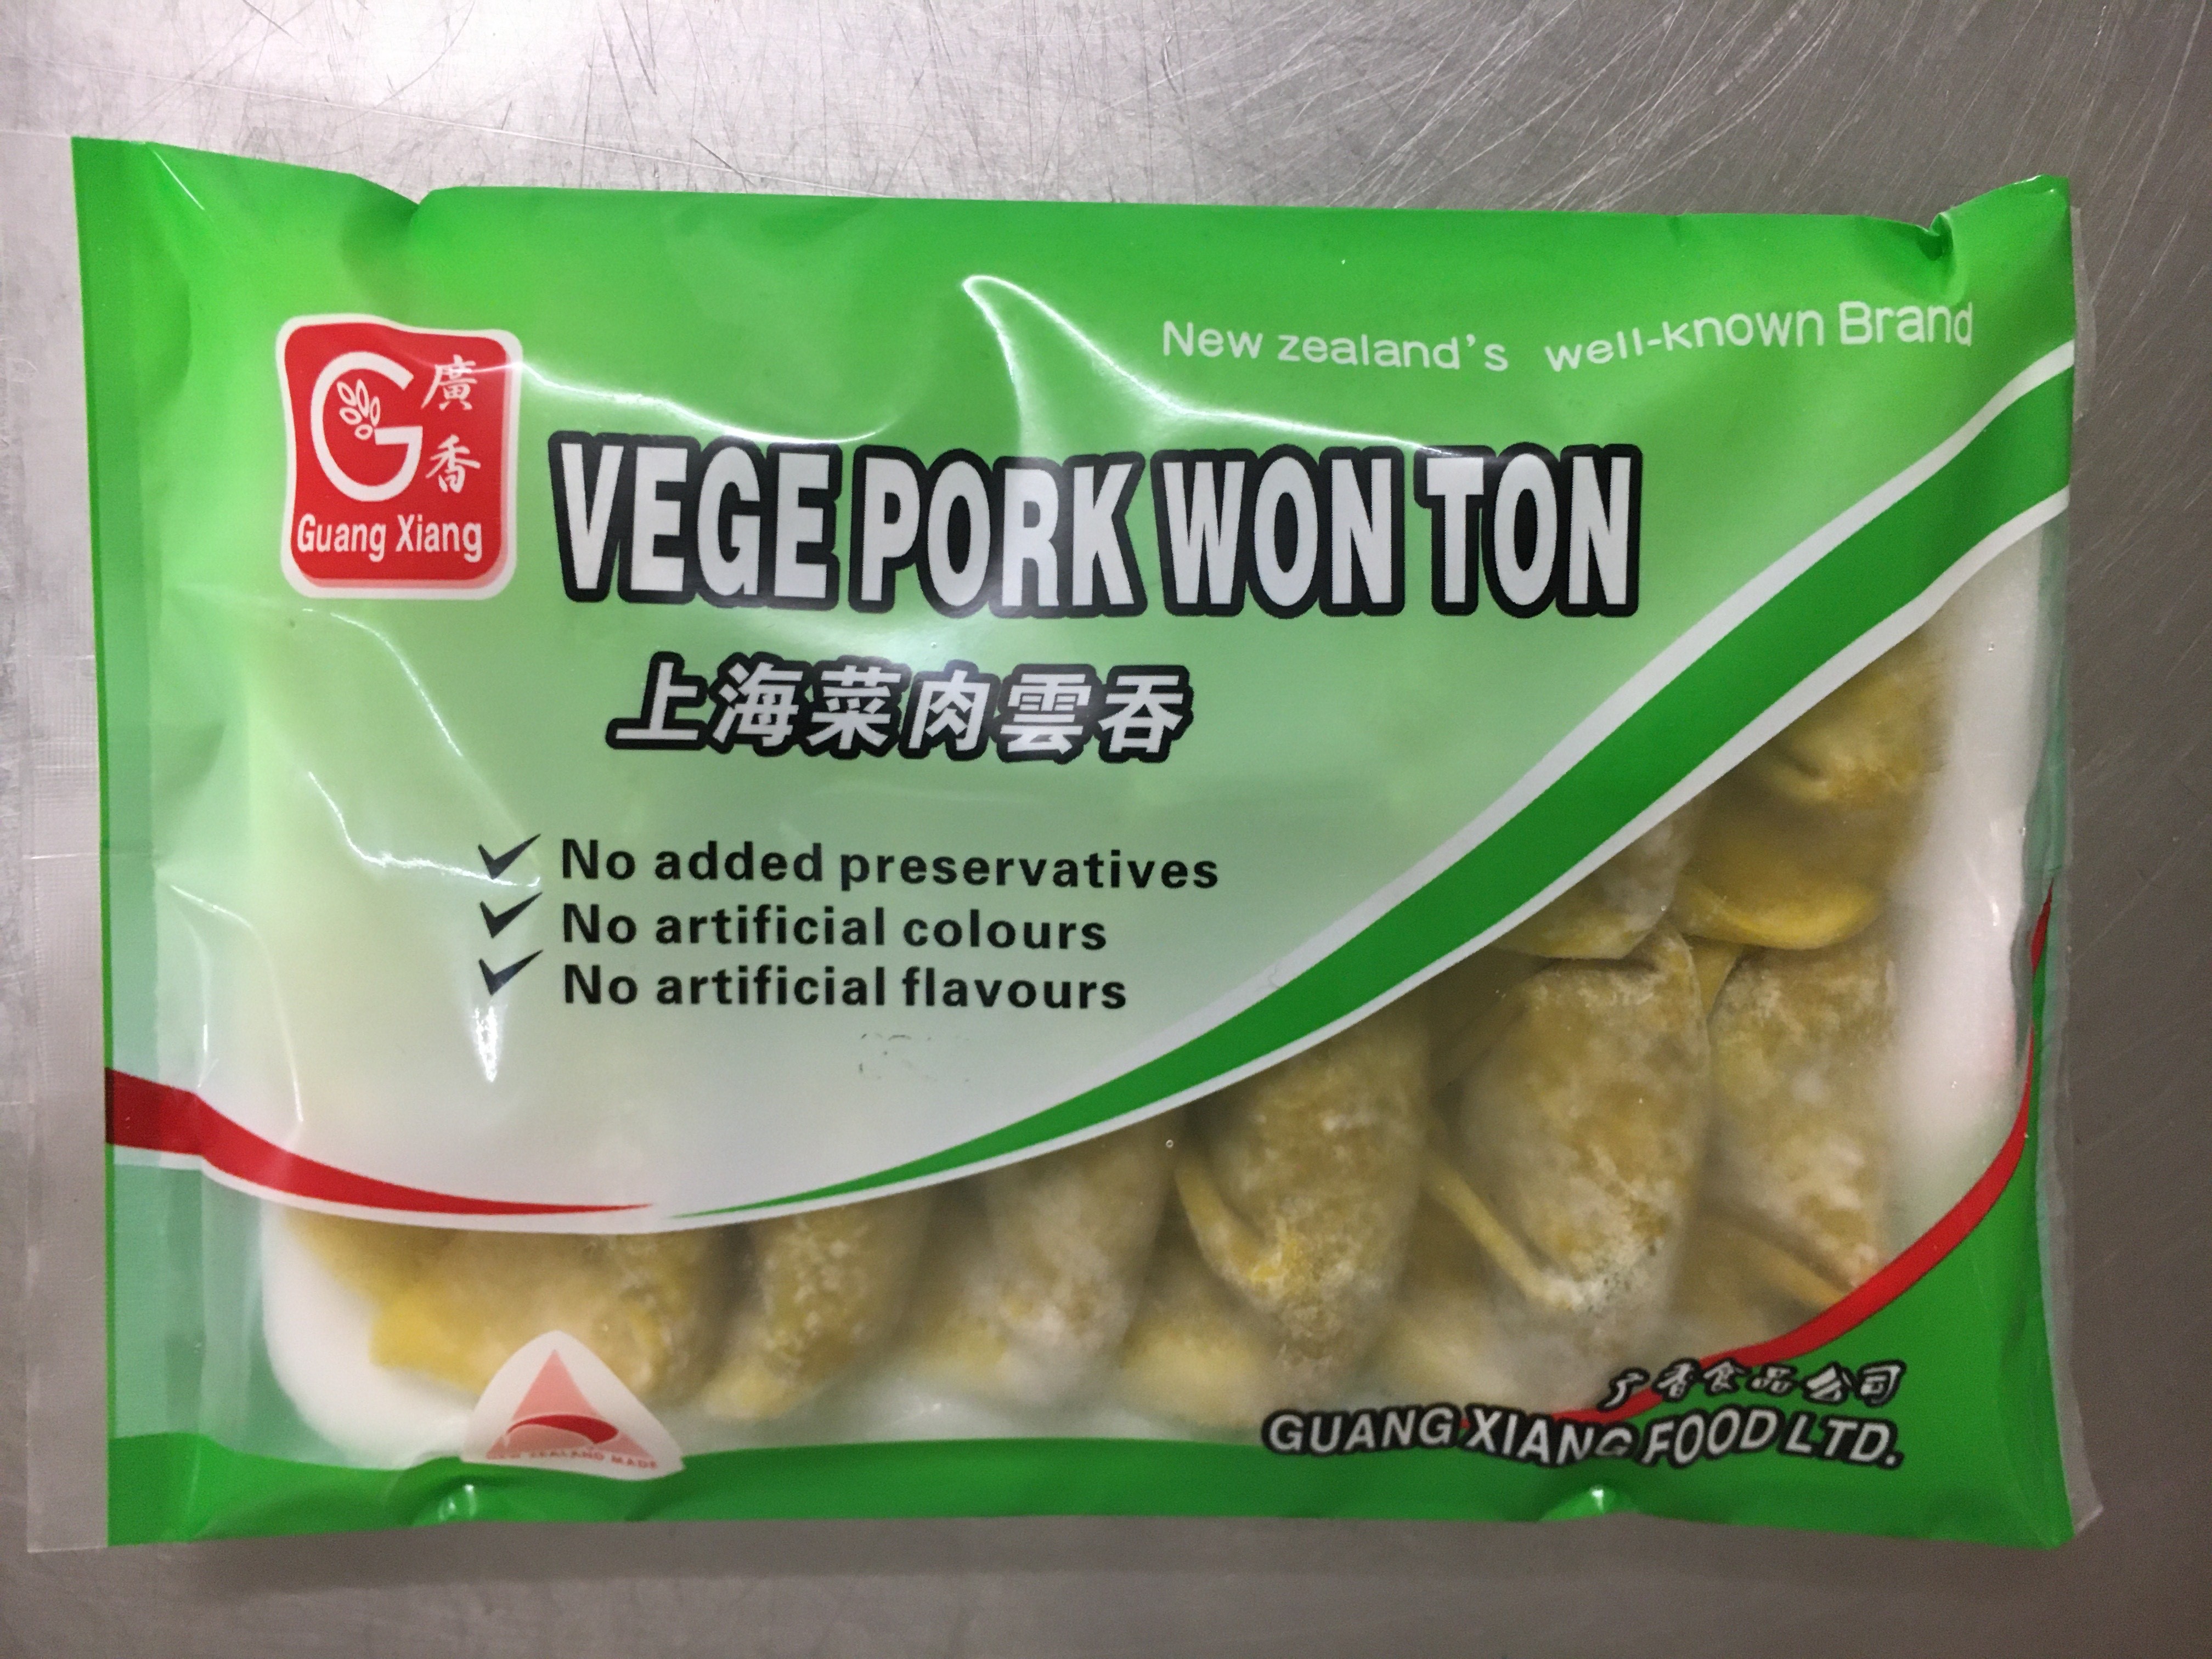 Image of Guangxiang brand Vege Pork Won Ton (200g) in a plasti pack